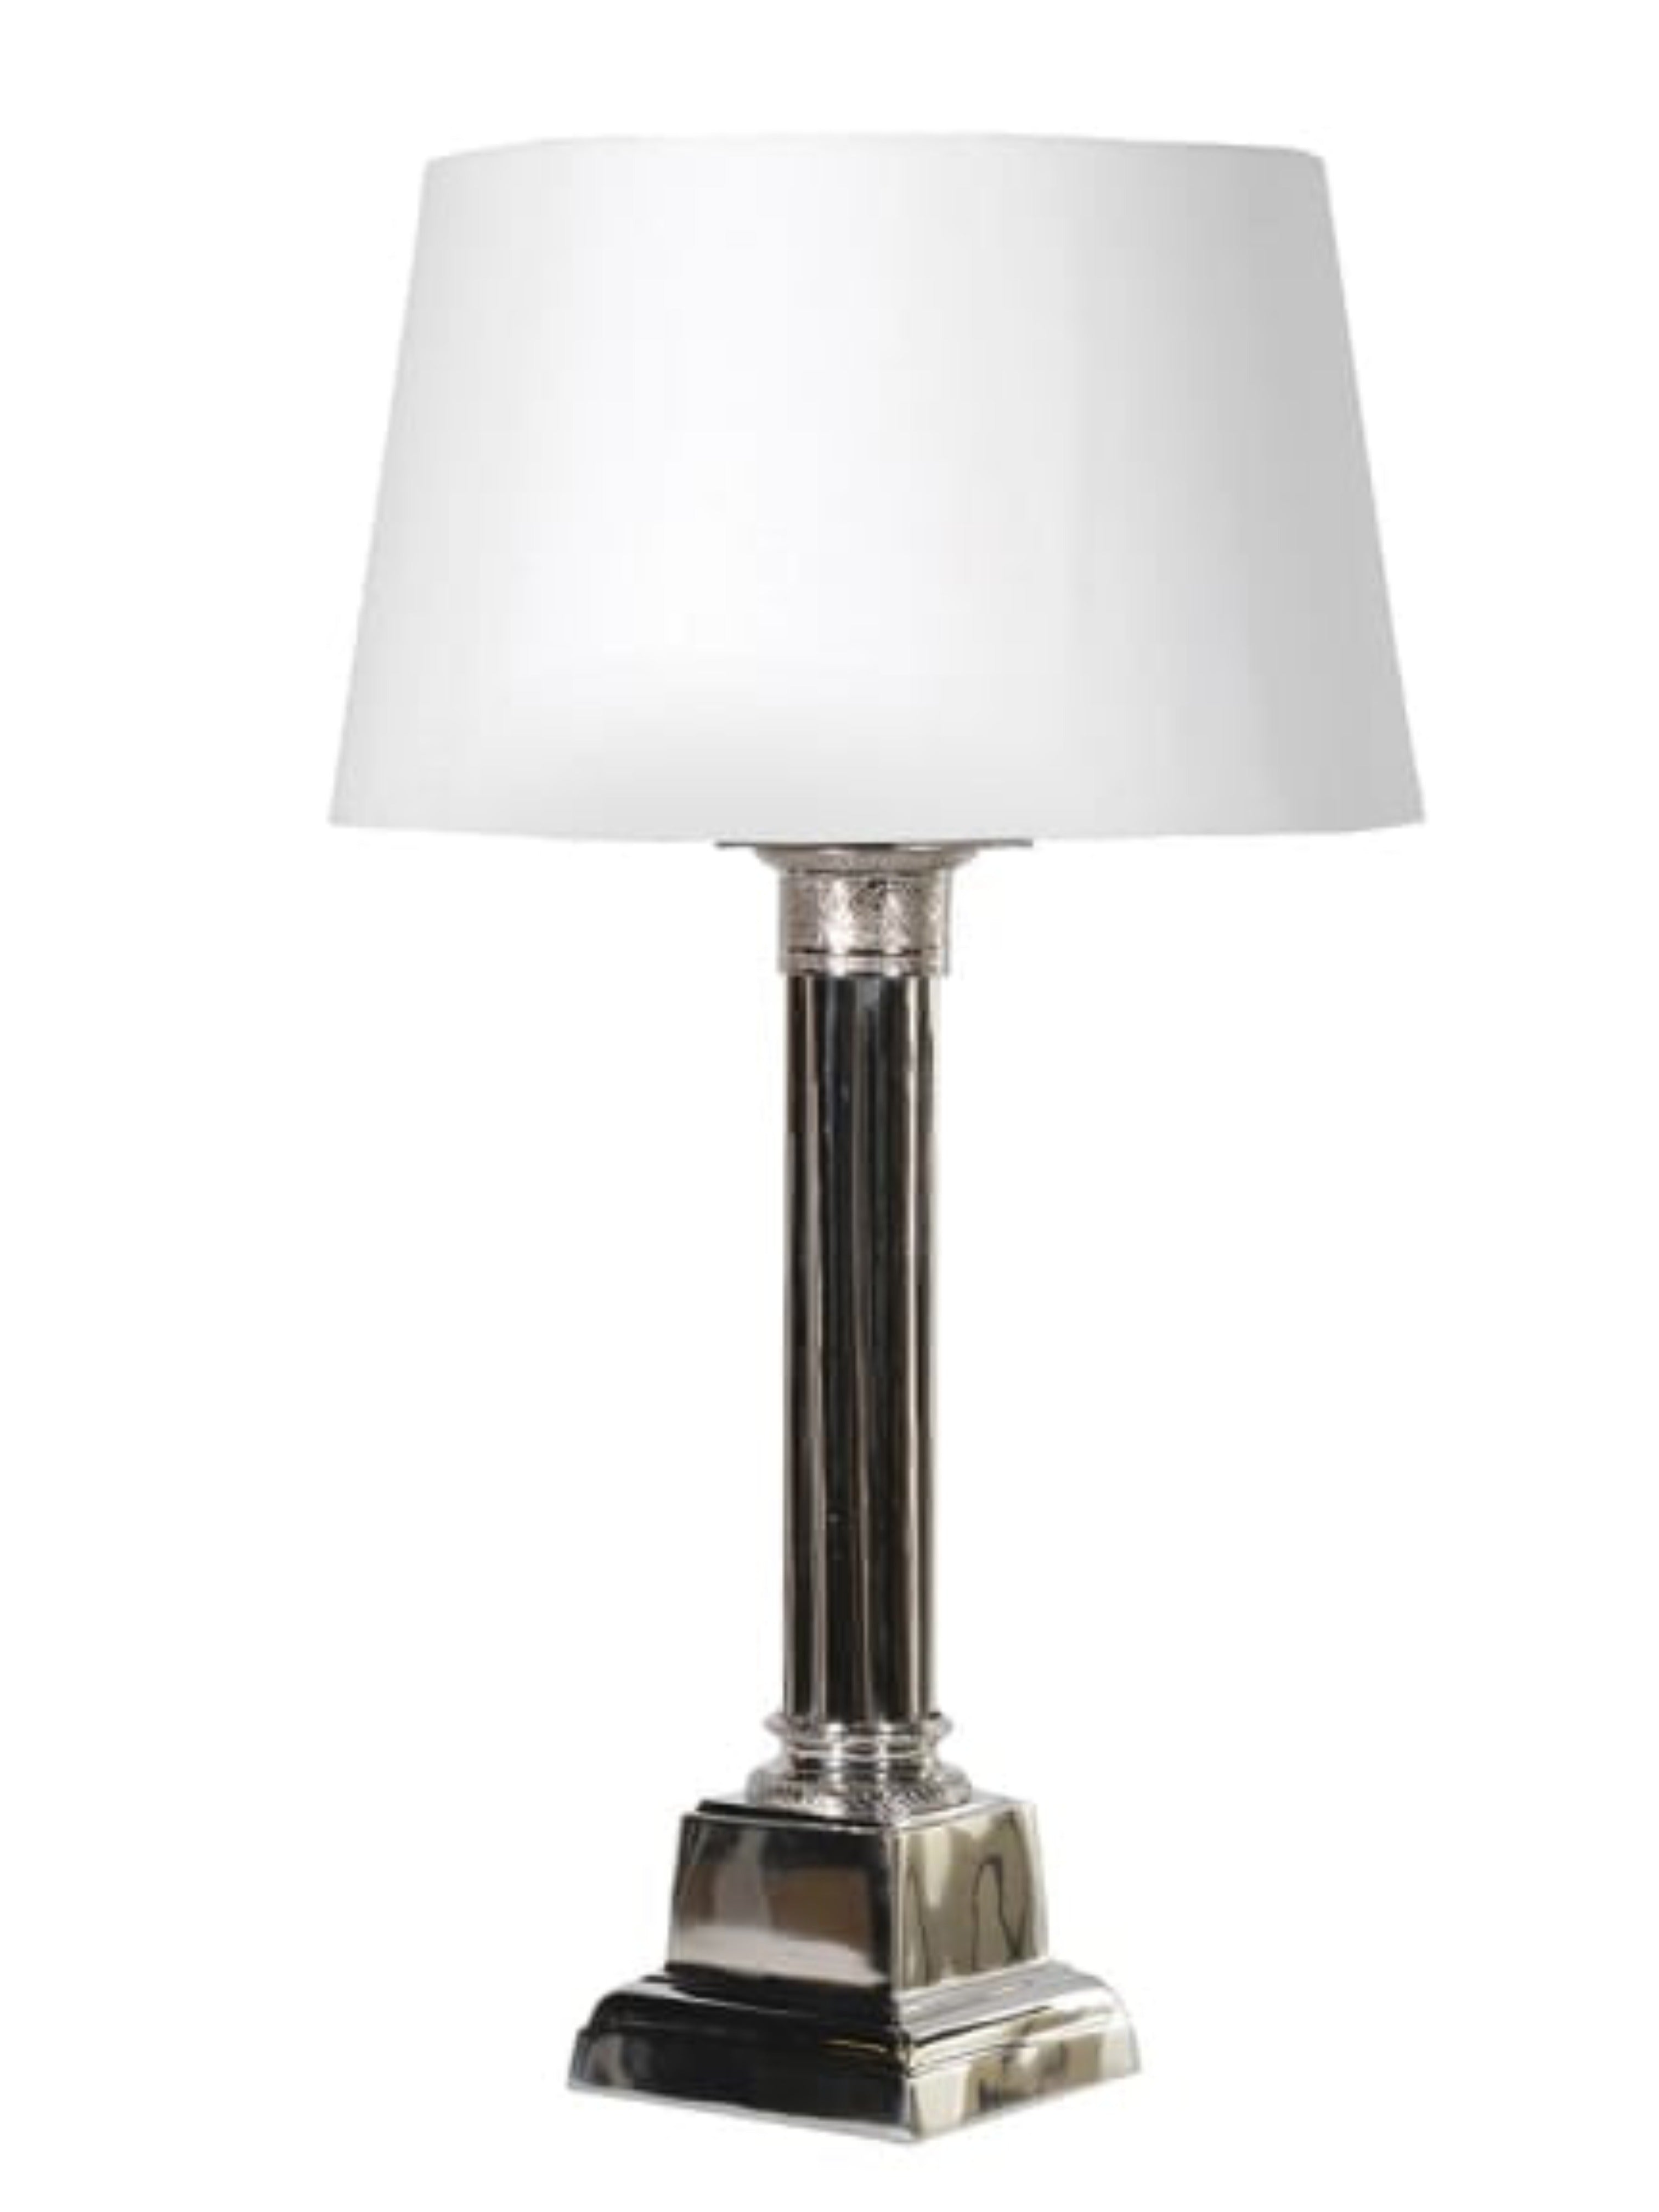 Nickel Column Lamp with White Shade